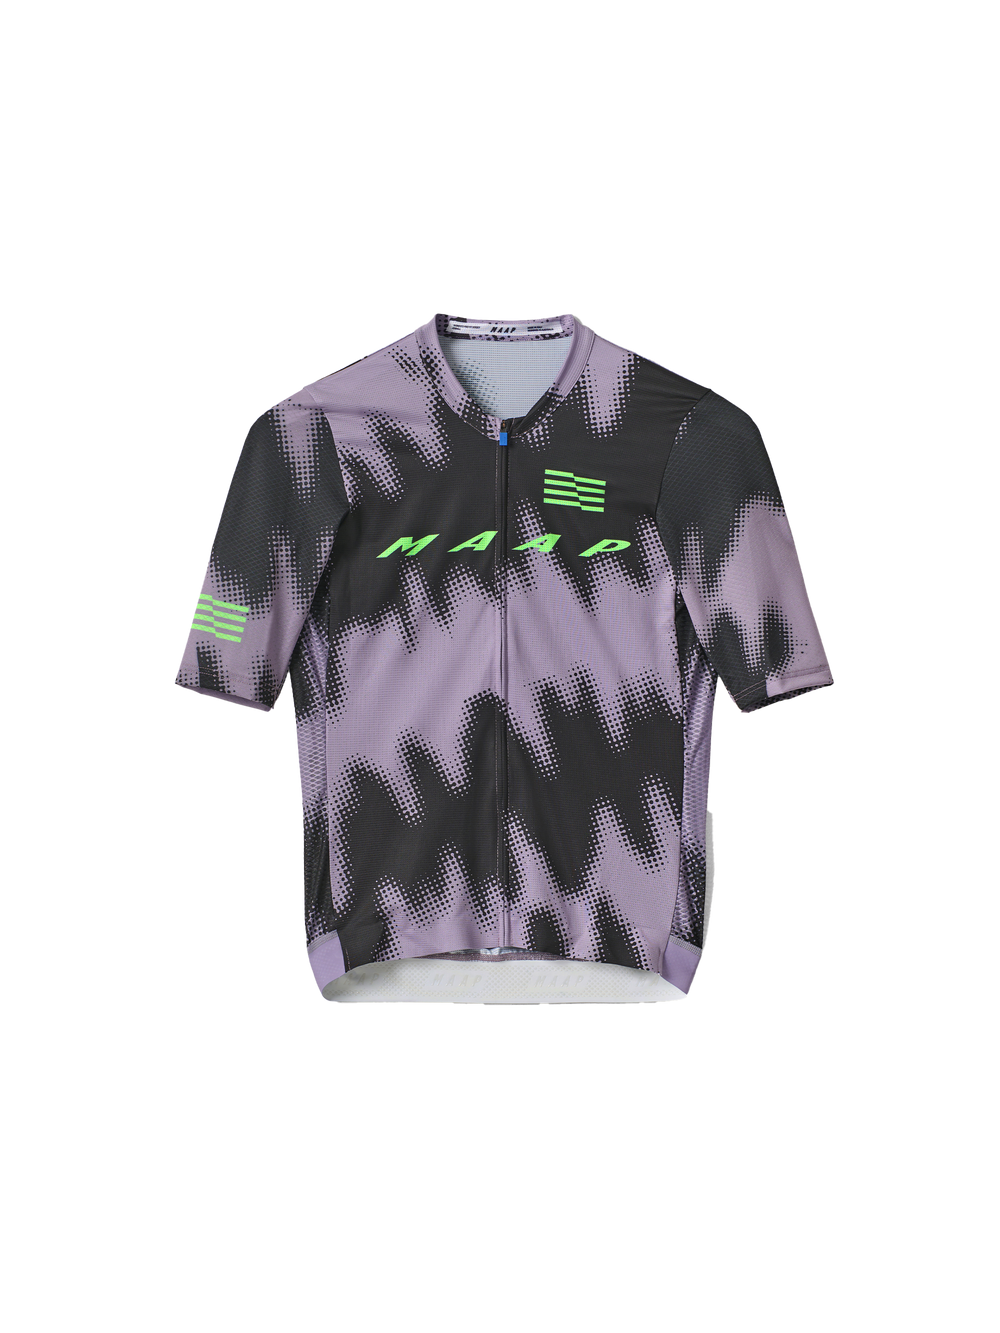 Product Image for LPW Pro Air Jersey 2.0